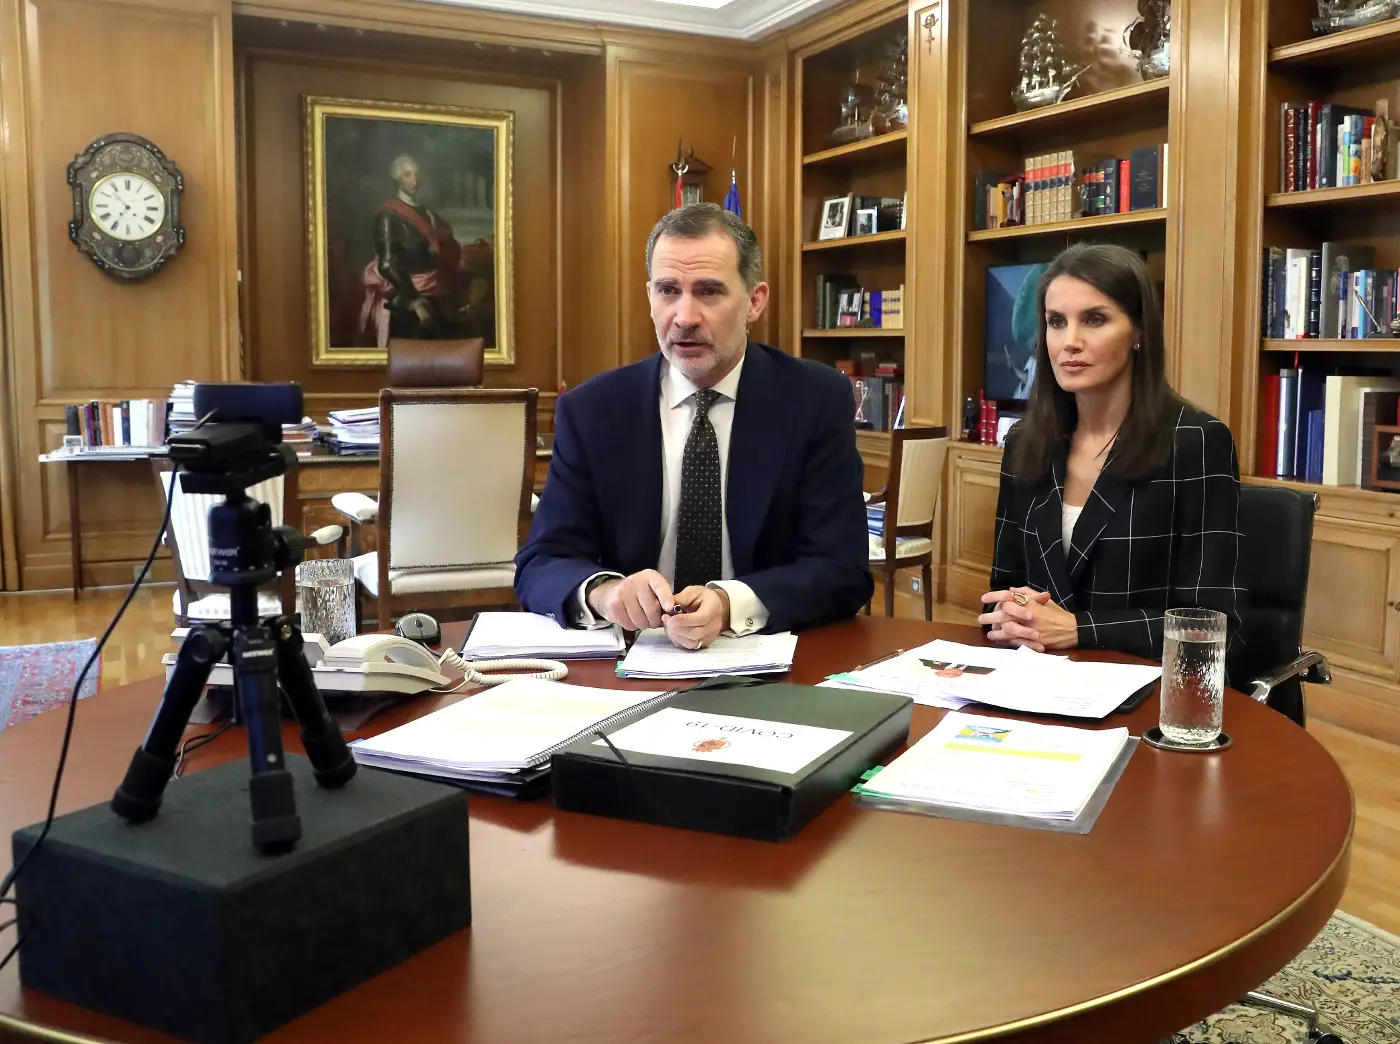 Letizia and King Felipe of Spain today started their day with a videoconference with the president of the General Council Official Medical Associations